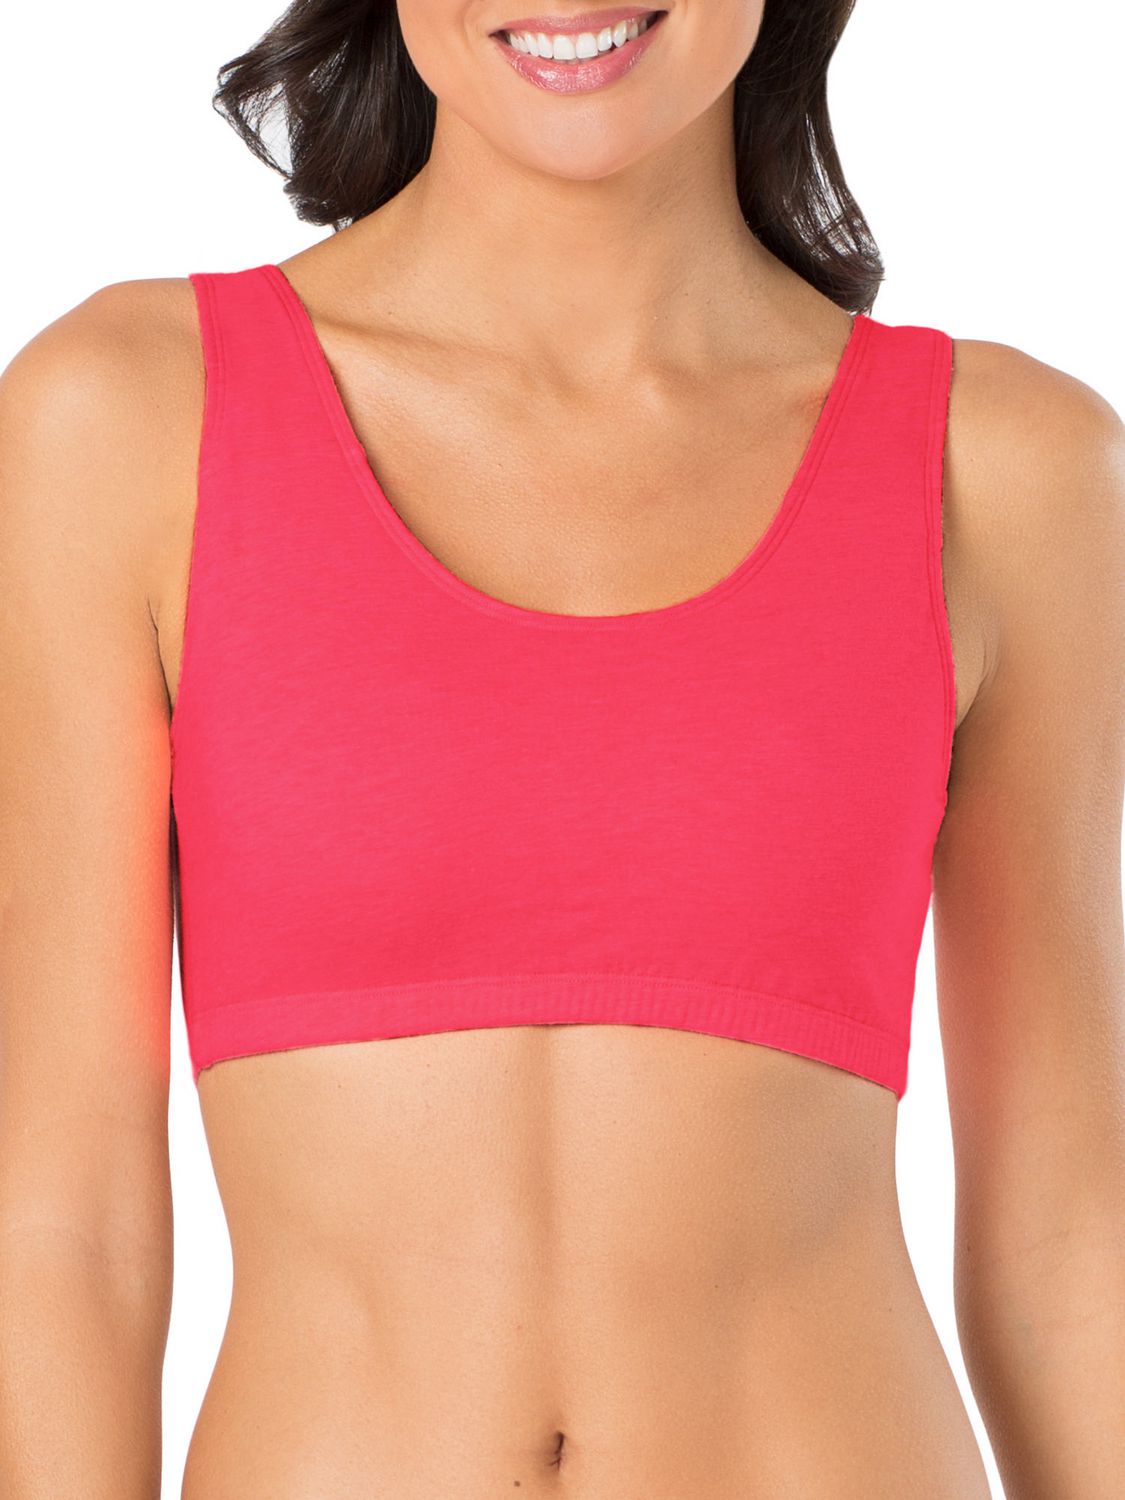 GetUSCart- Fruit of the Loom Women's Front Close Builtup Sports Bra,  Blushing Rose/Charcoal Heather 2-Pack, 46